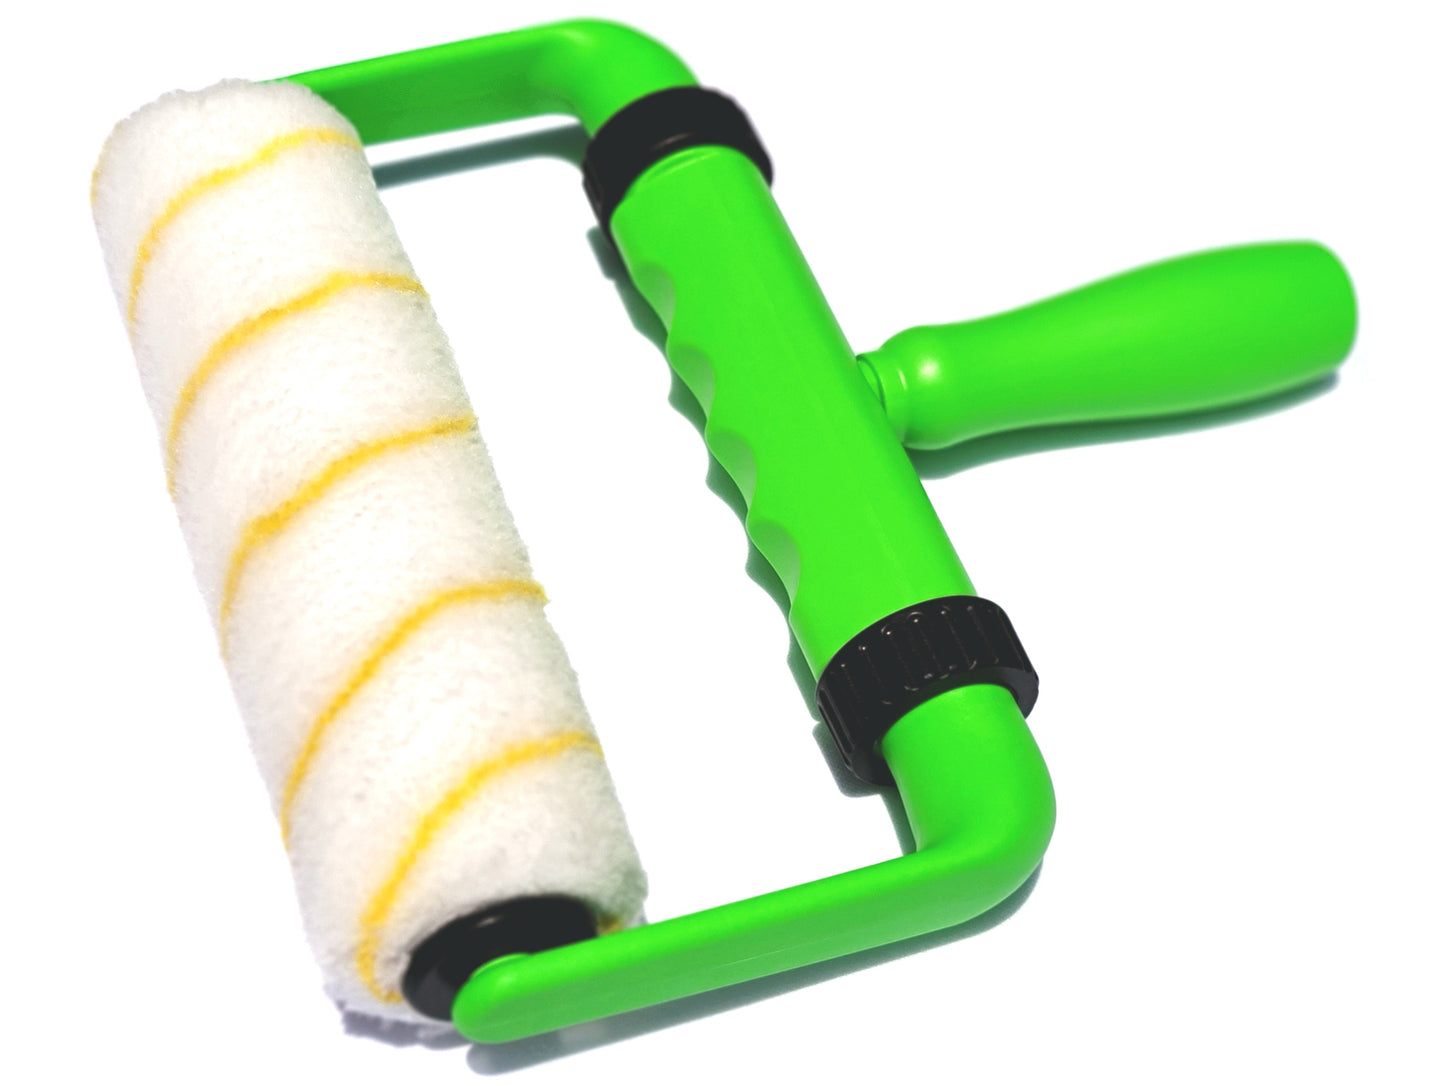 A photo showing the entire BetterGrip Paint Roller, with the roller cover and extension handle attached.  You can also see the finger grooves on the bottom of the main handle.